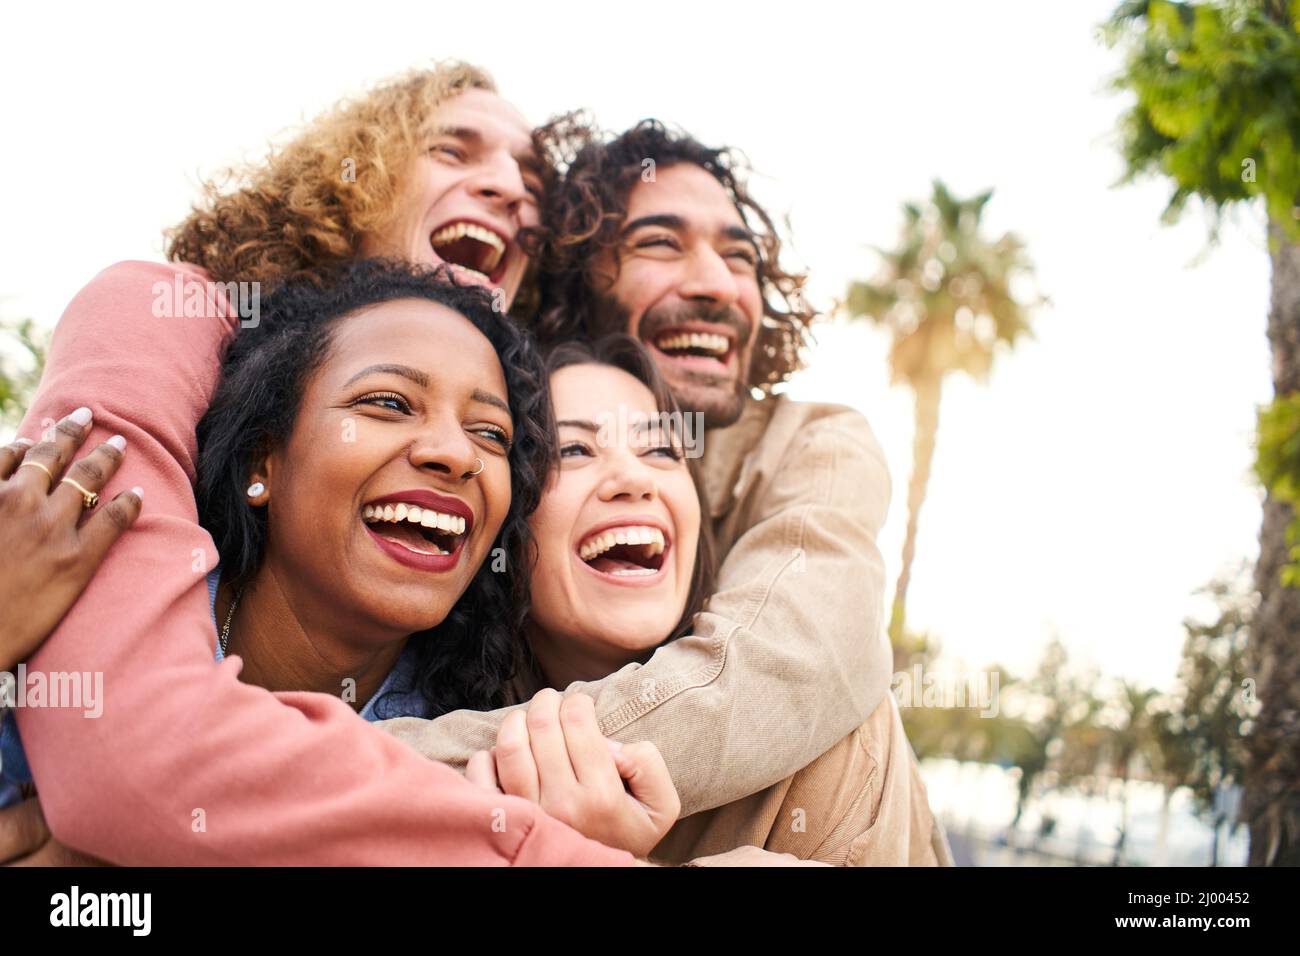 Embrace People Laughing. Young group of Friends Outdoors. Youth Culture and City Lifestyle Stock Photo